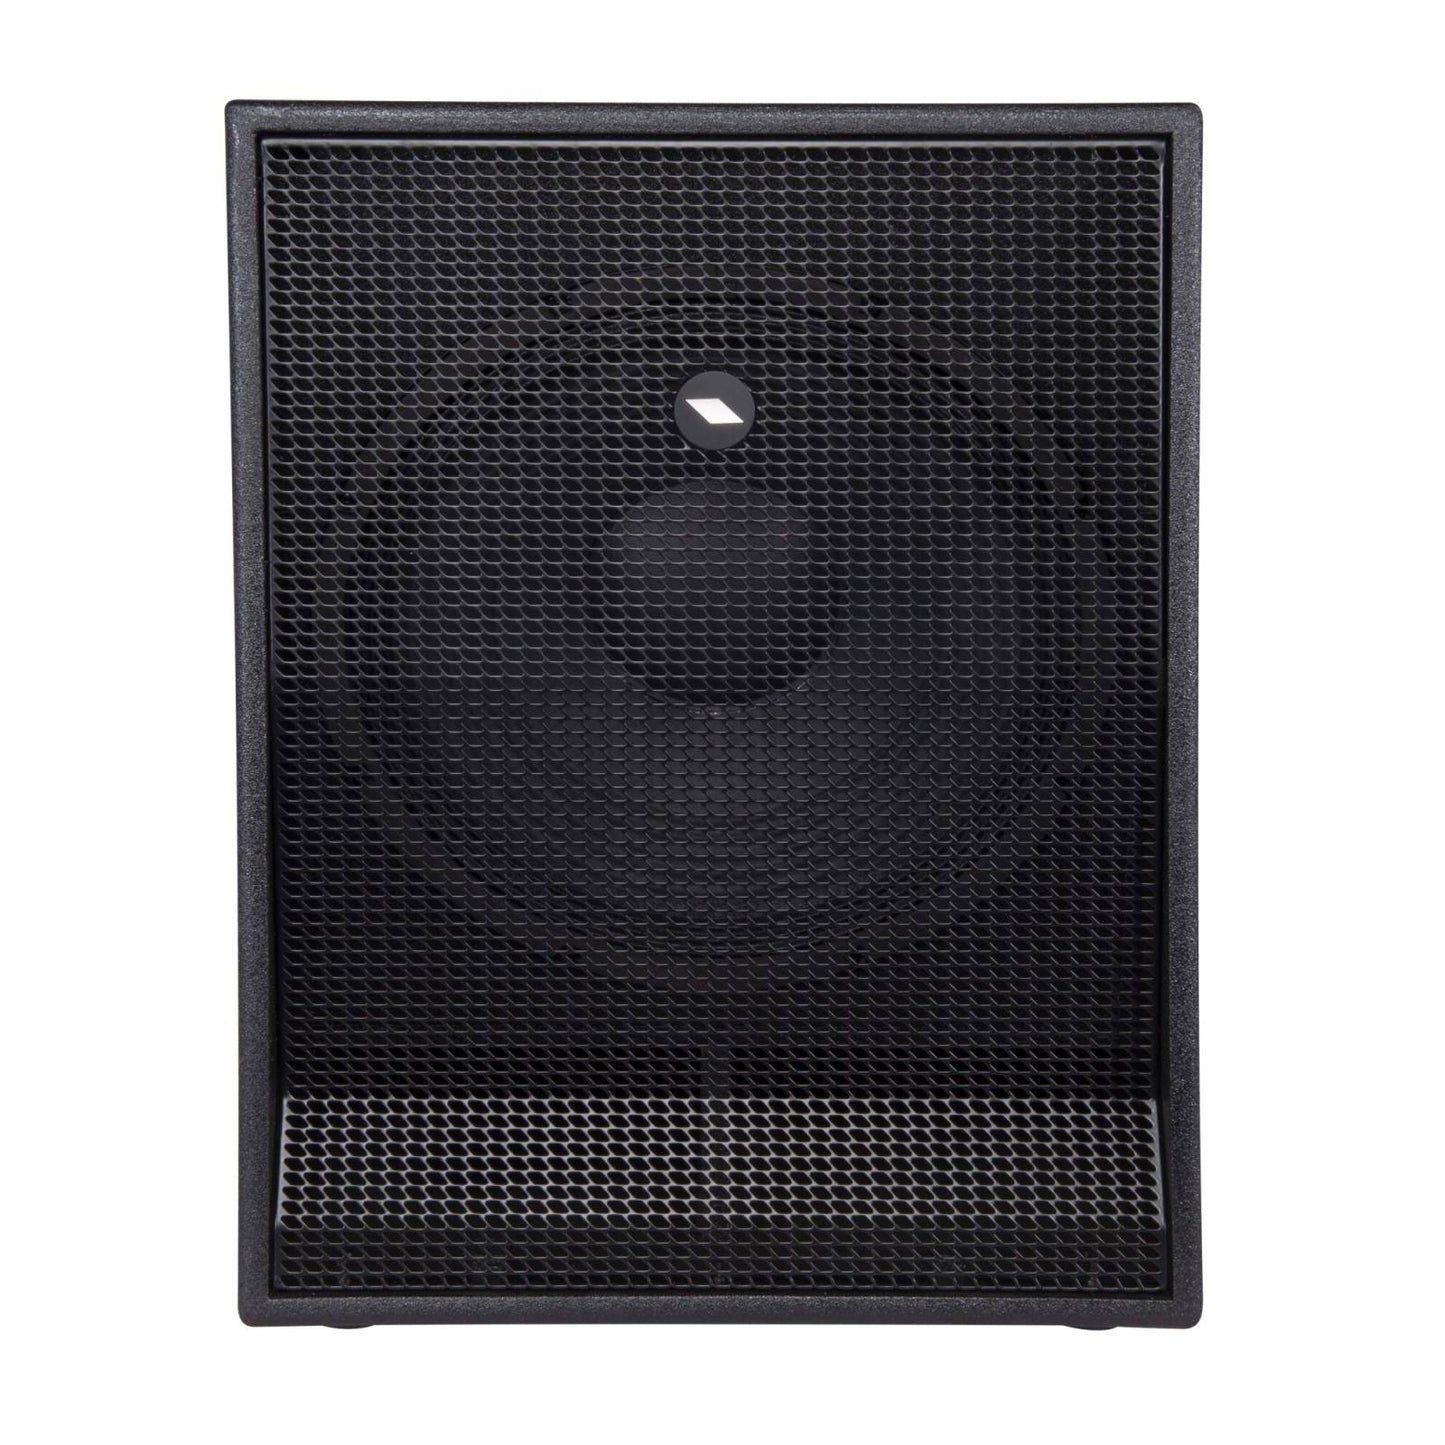 Proel S15A 15-inch Active PA Subwoofer